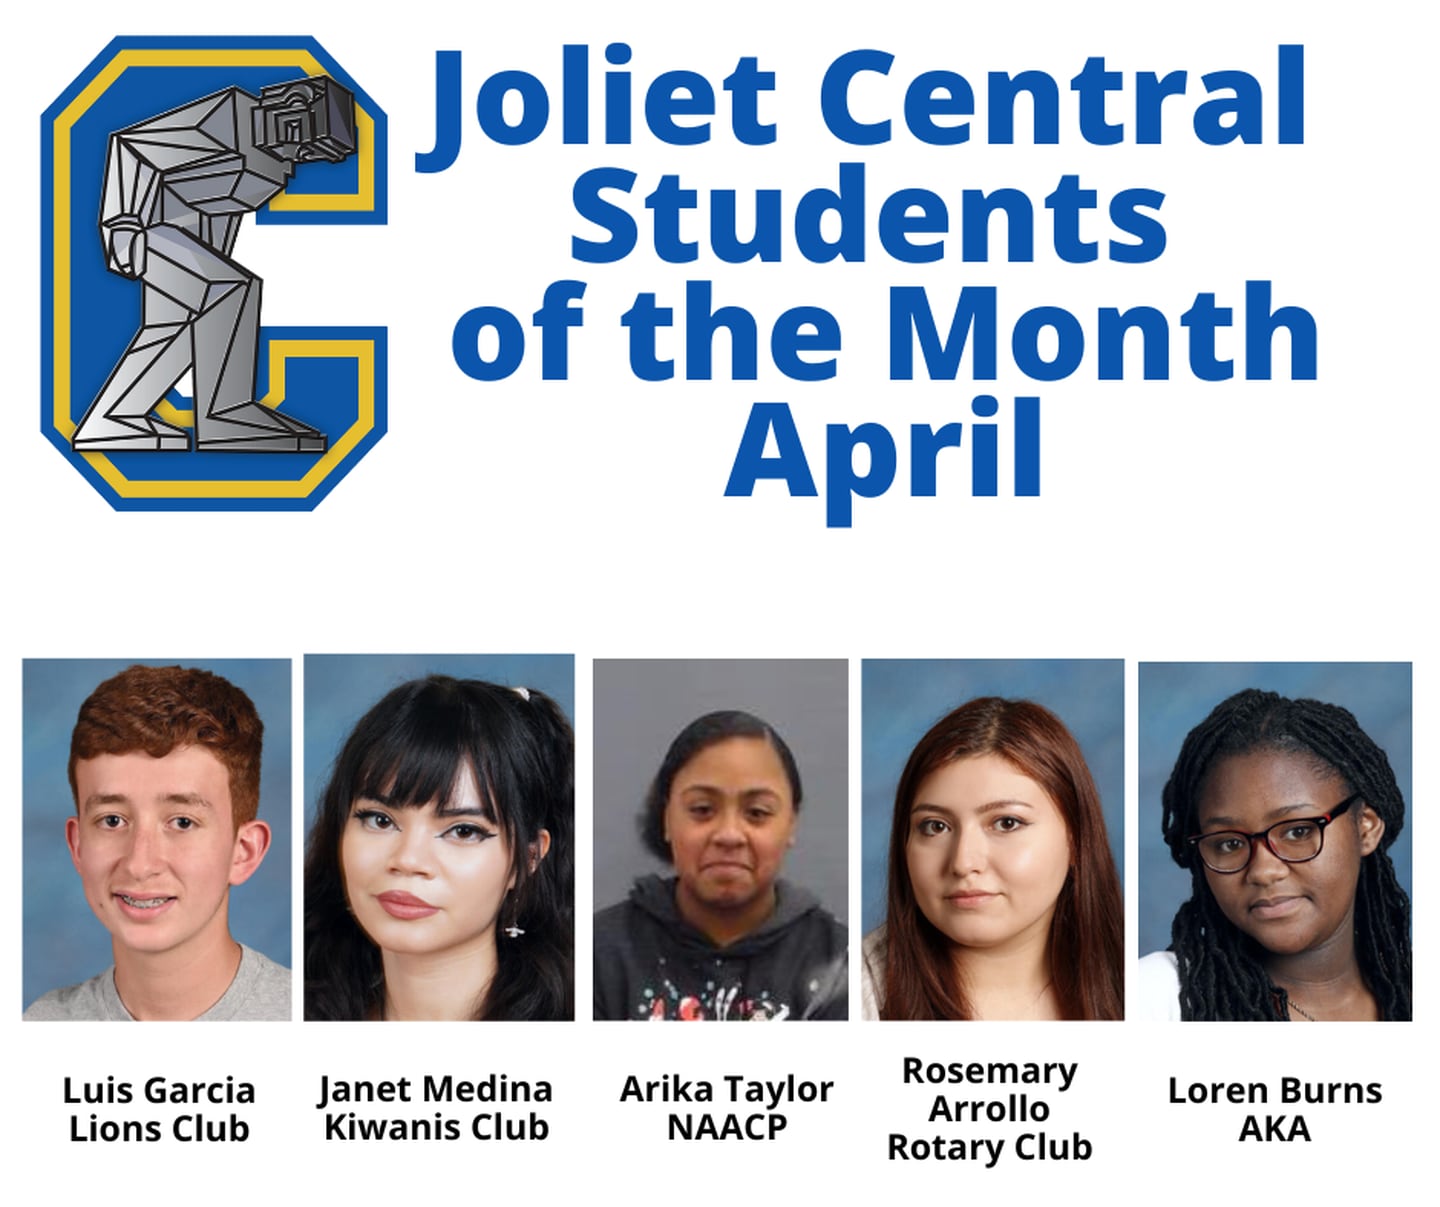 Joliet Central High School Students of the Month for April.